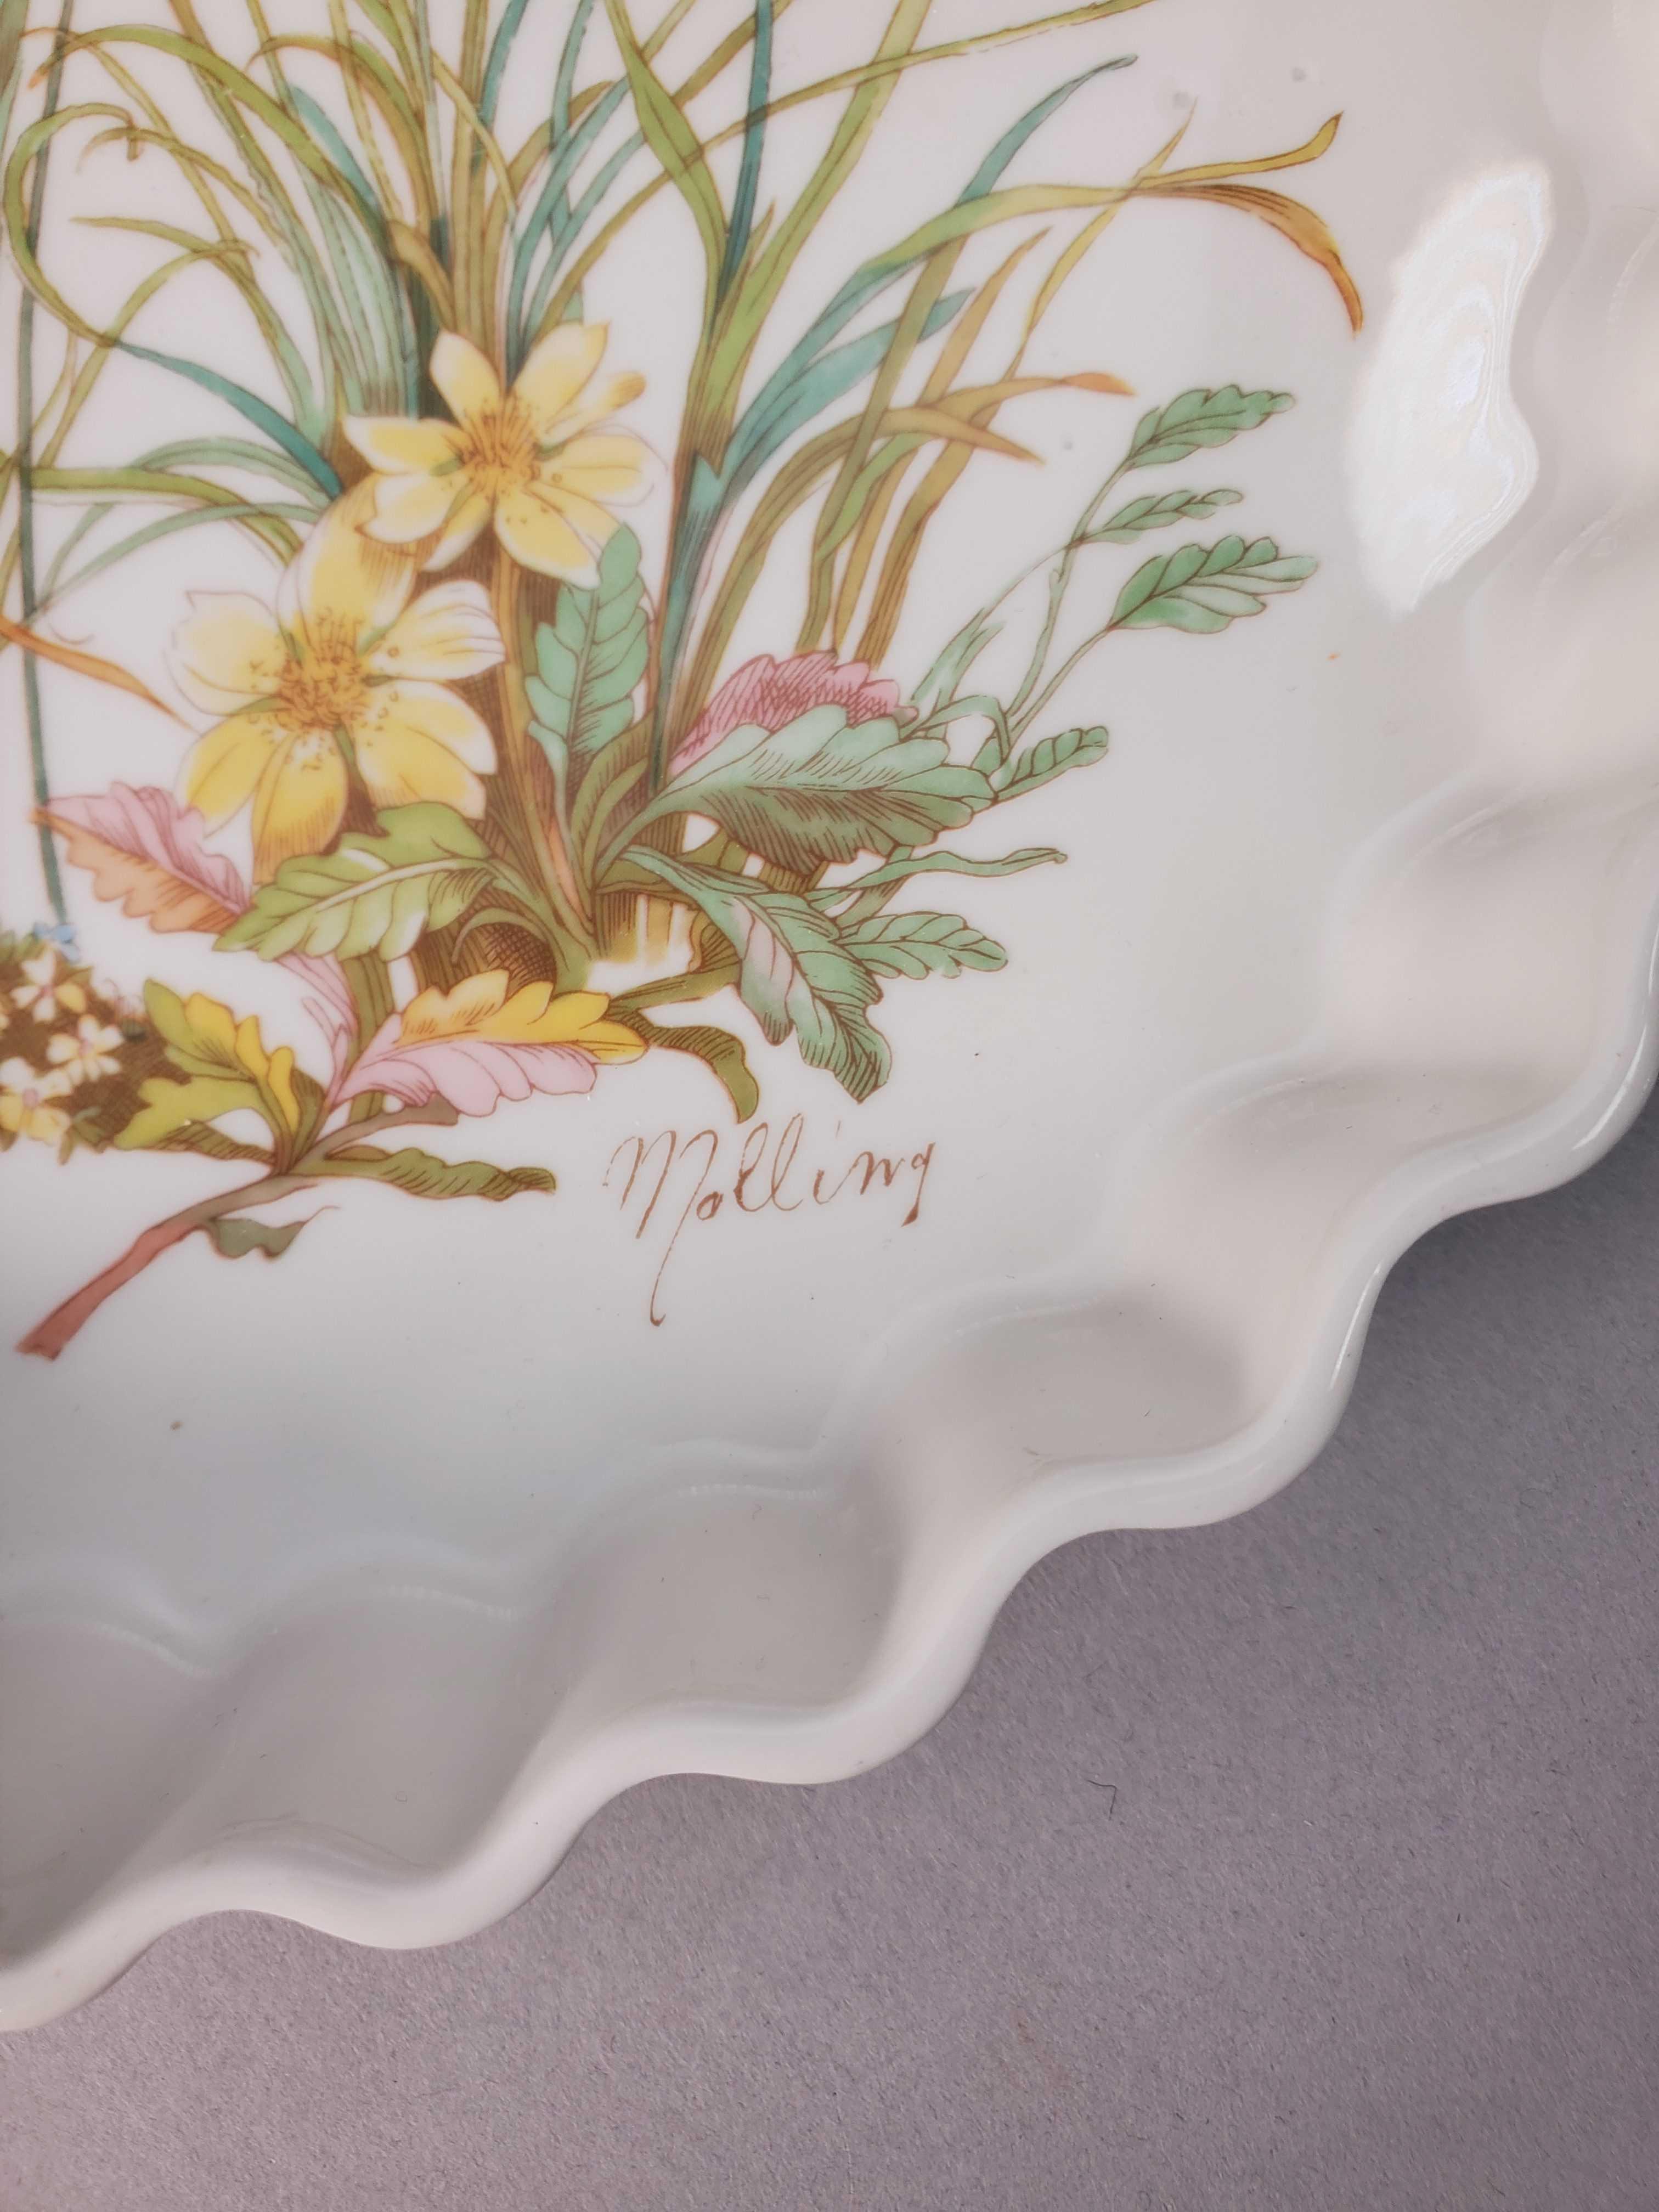 Hand Painted Serving Dishes & More (LPO)